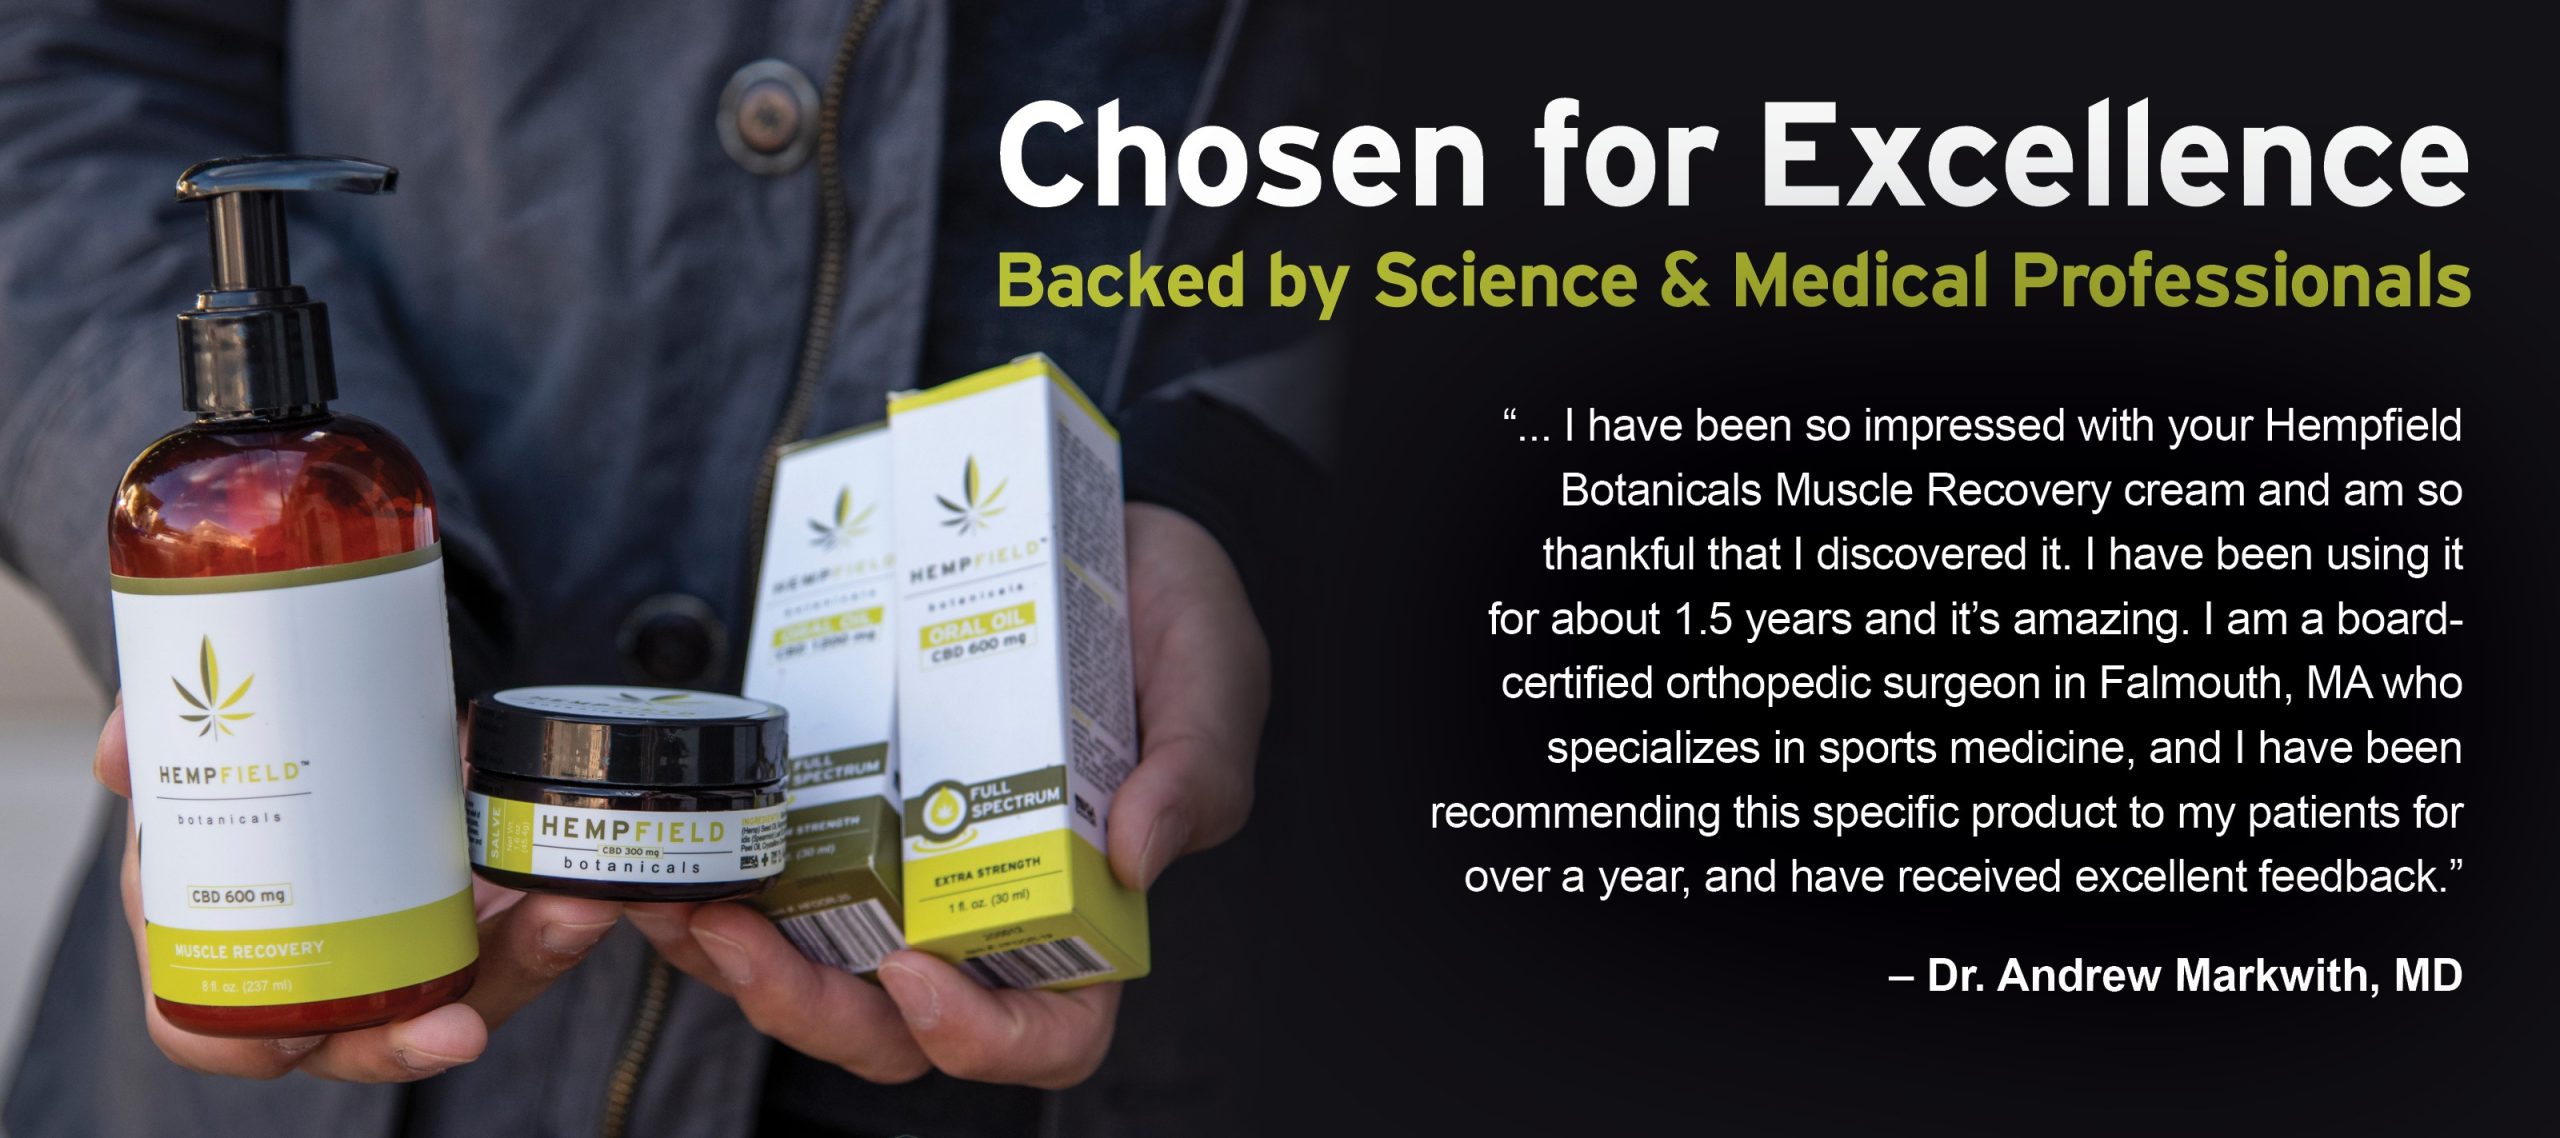 Chosen for Excellence. Backed by Science & Medical Professionals | Hempfield Botanicals